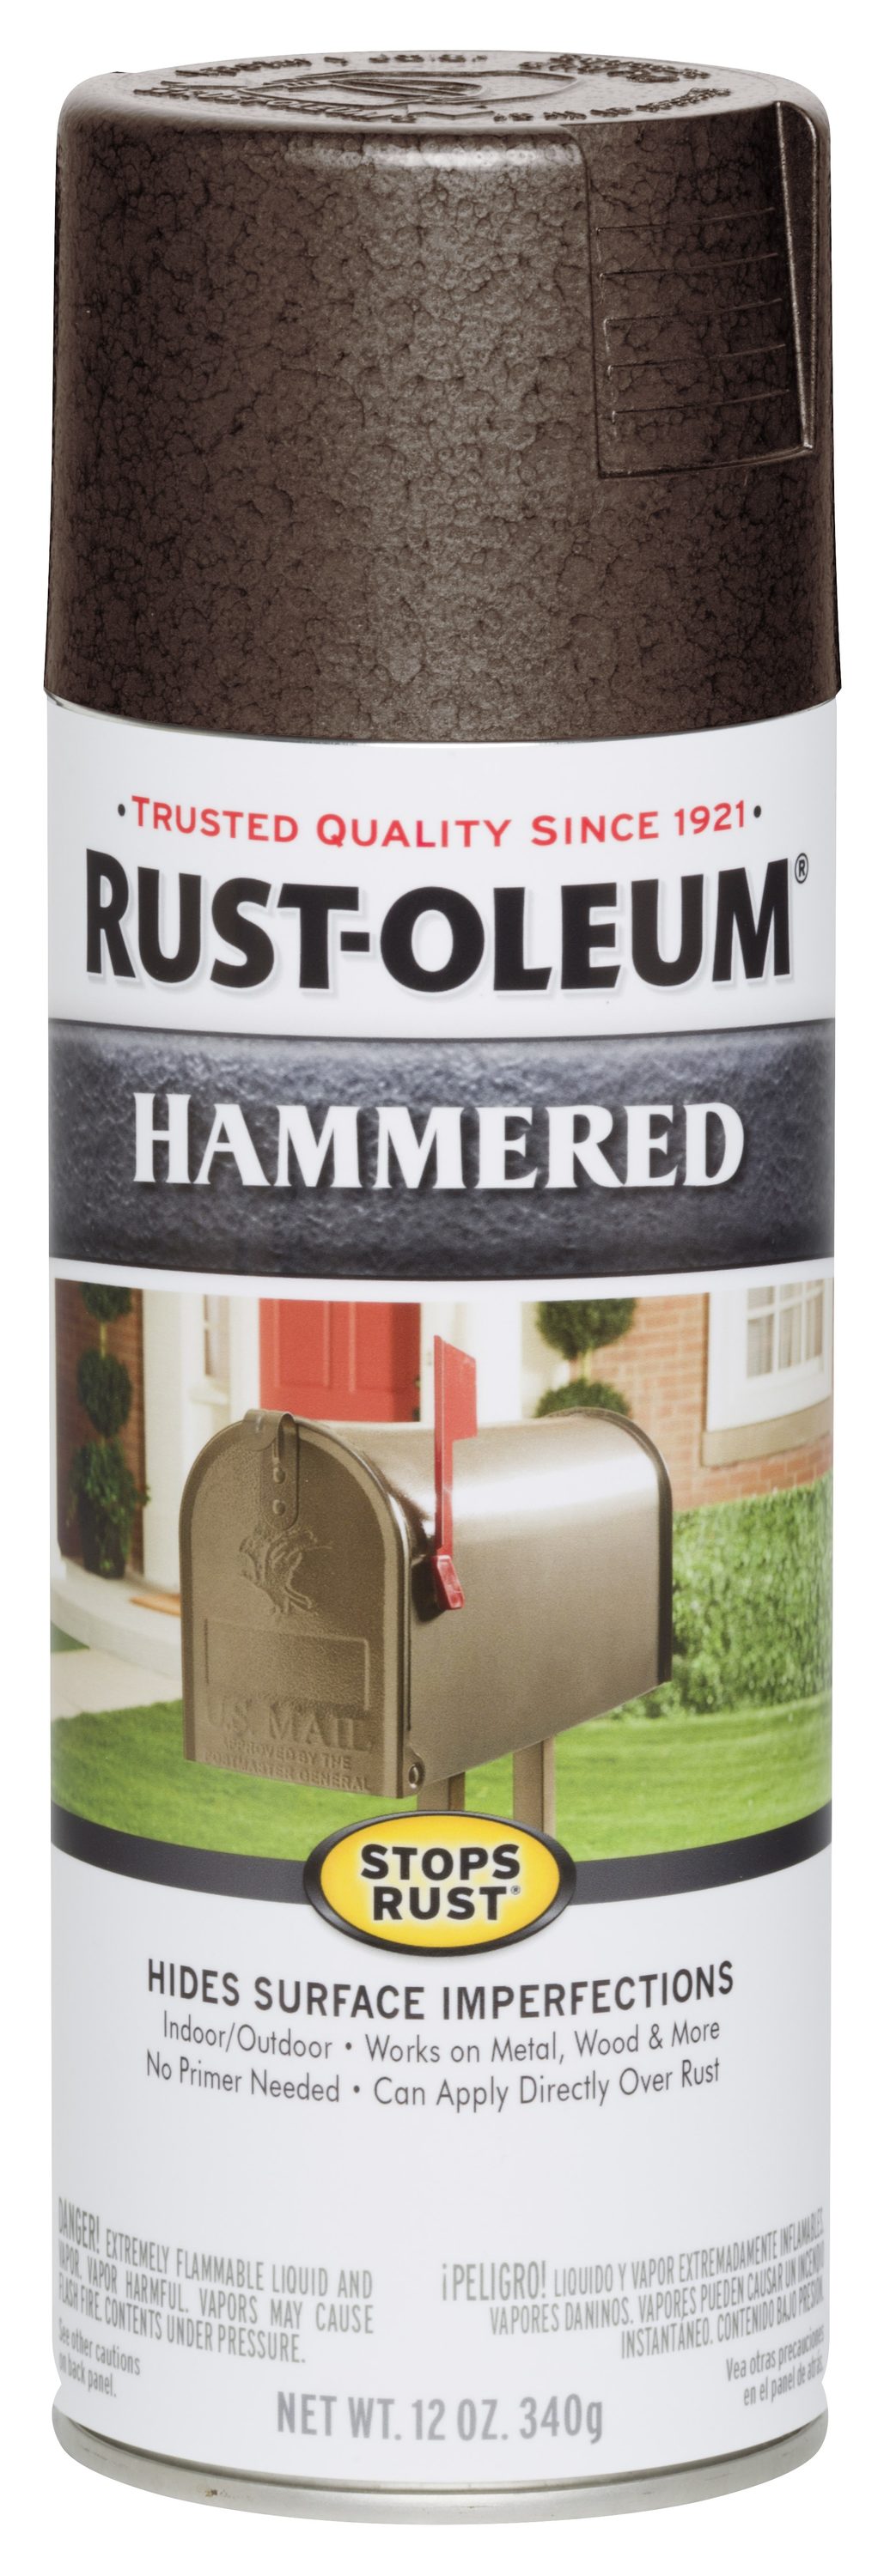 Rust-Oleum Universal Gloss Black Hammered Spray Paint and Primer In One  (NET WT. 12-oz)